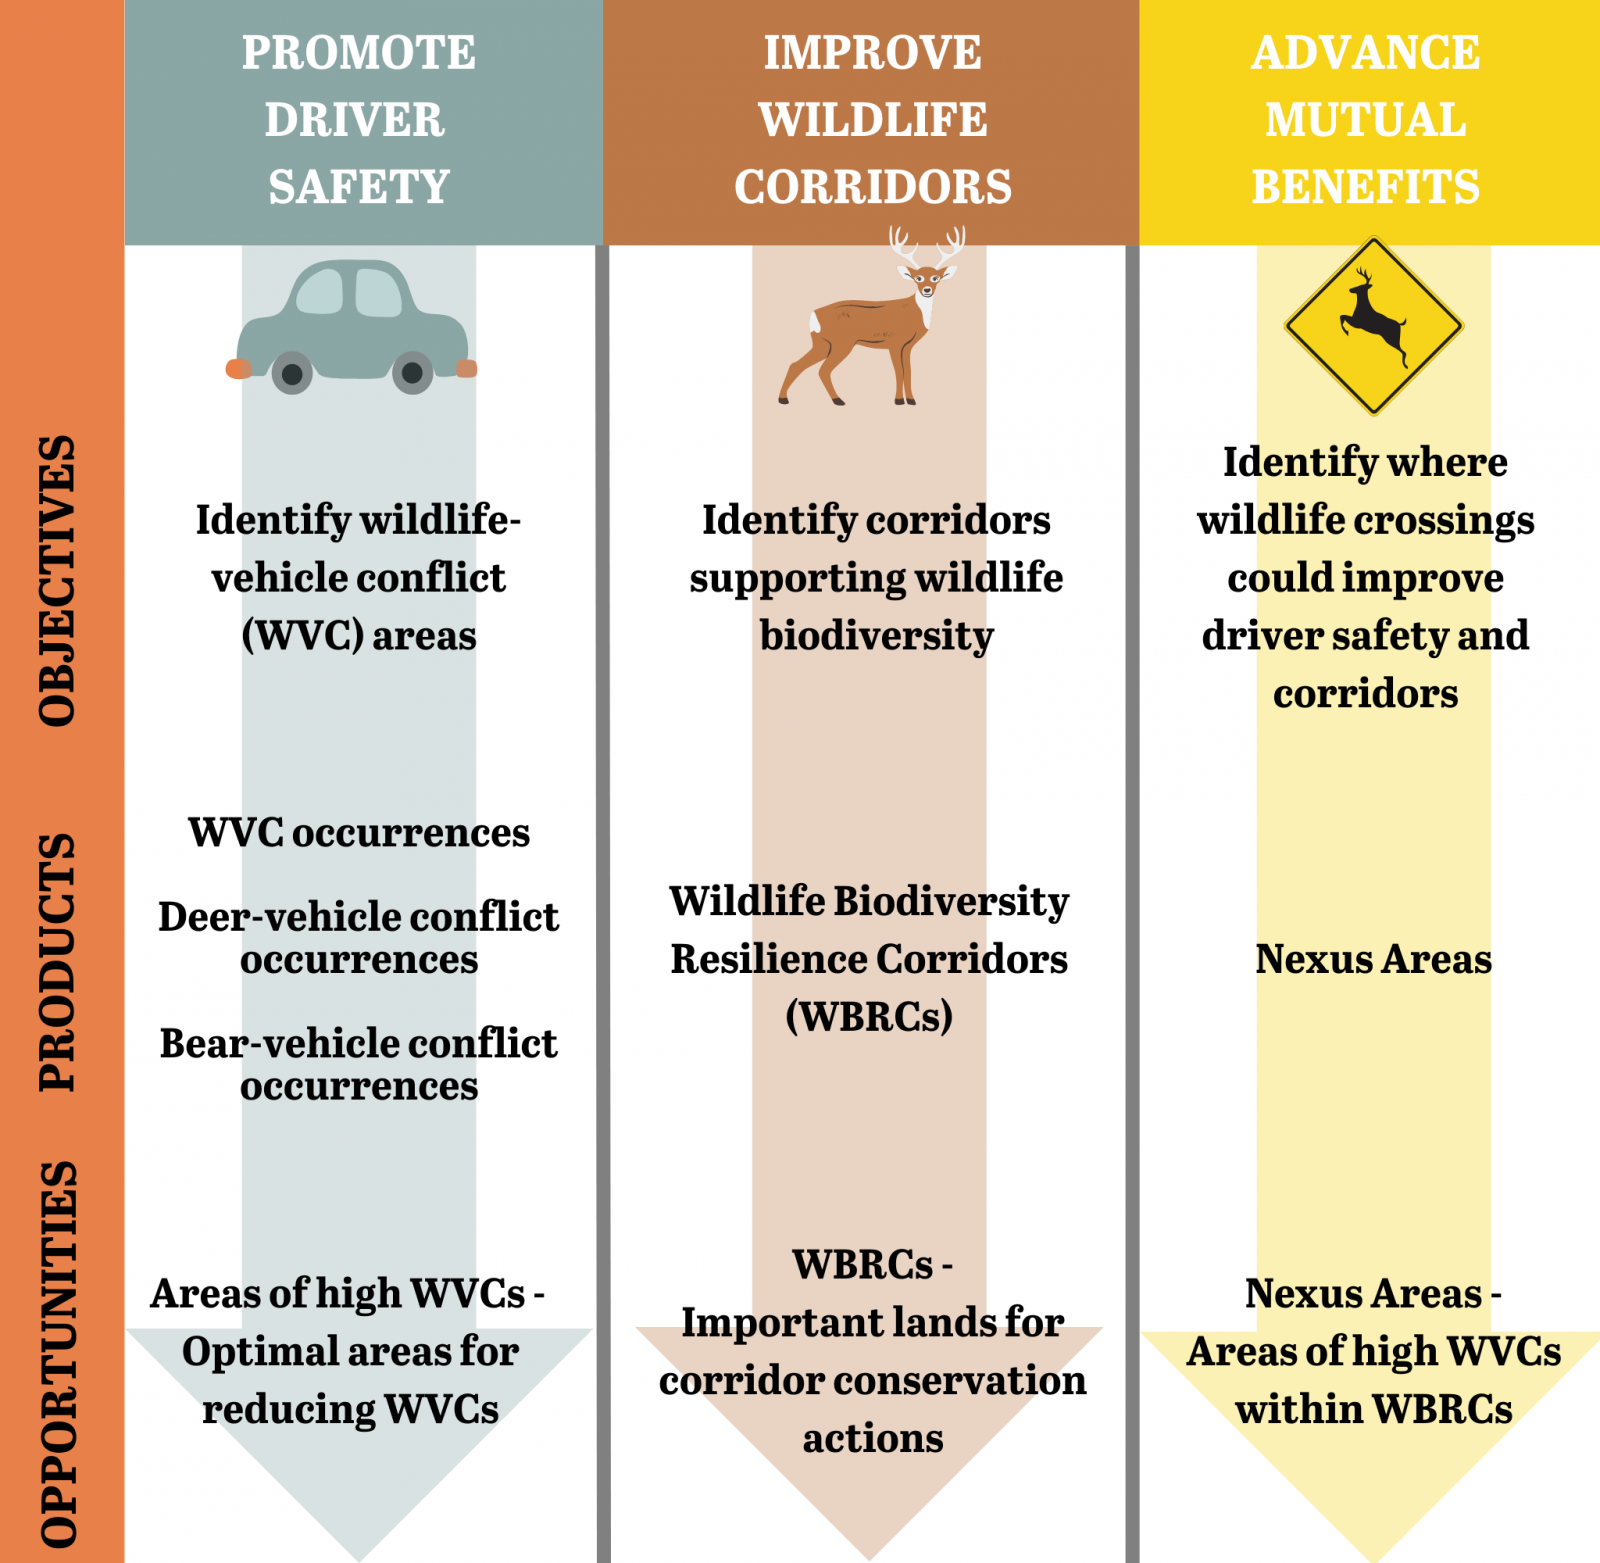 This graphic depicts the pathways of information and tools best used for accomplishing the three main themes from the plan. Those themes are 1) promoting driver safety, 2) improving wildlife corridors, and 3) a combination of those two which focuses on mutual benefits for drivers and wildlife.